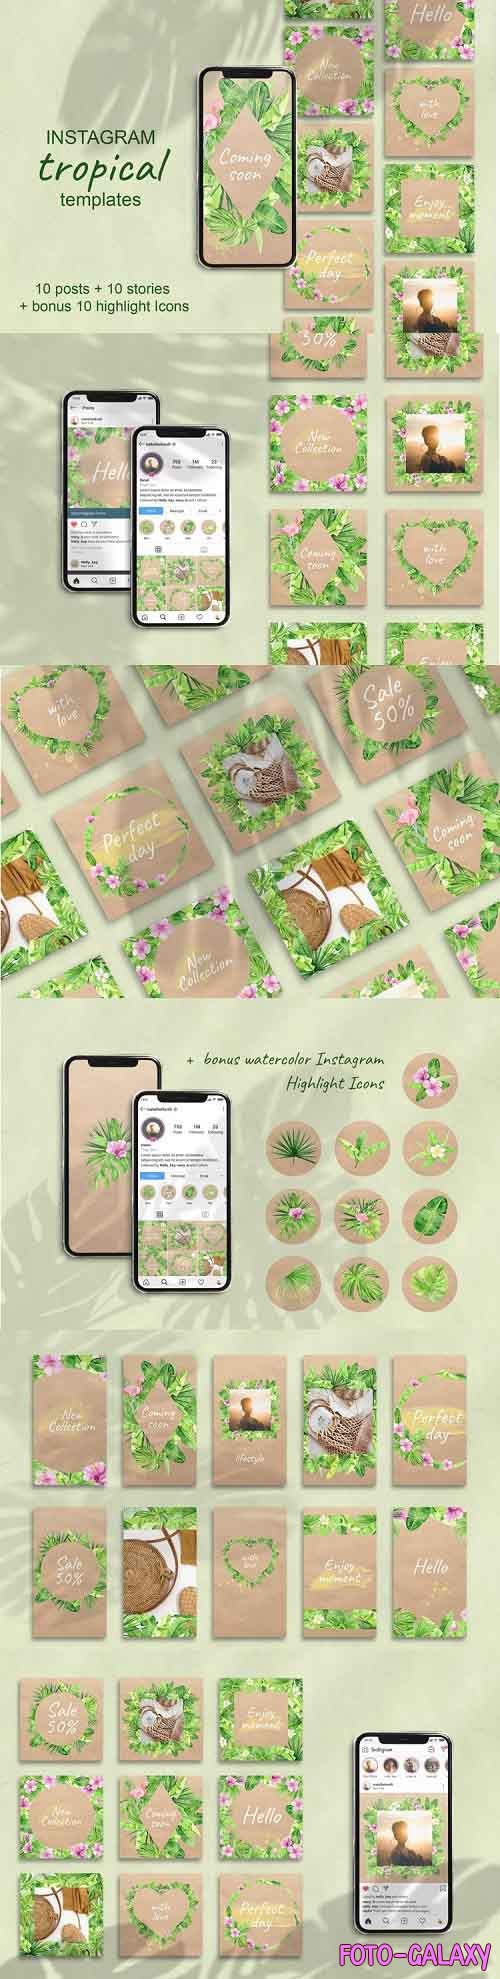 Tropical Instagram Template. Stories, Posts and Highlights - 897488